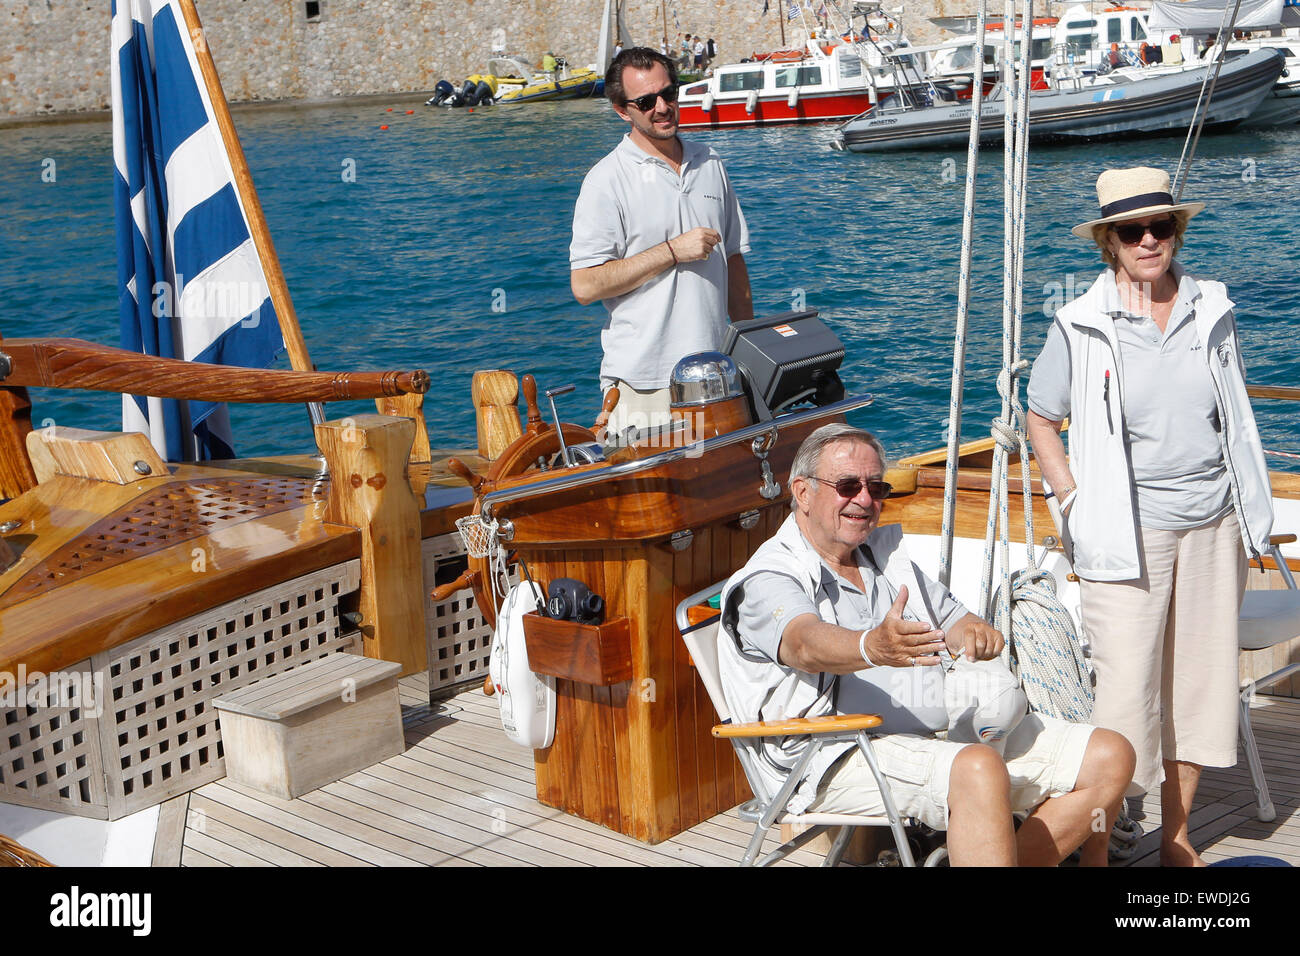 King Constantine of Greece, Queen Anne-Marie of Greece and their son Prince Nikolaos on their traditional boat 'Afroessa at the  Stock Photo